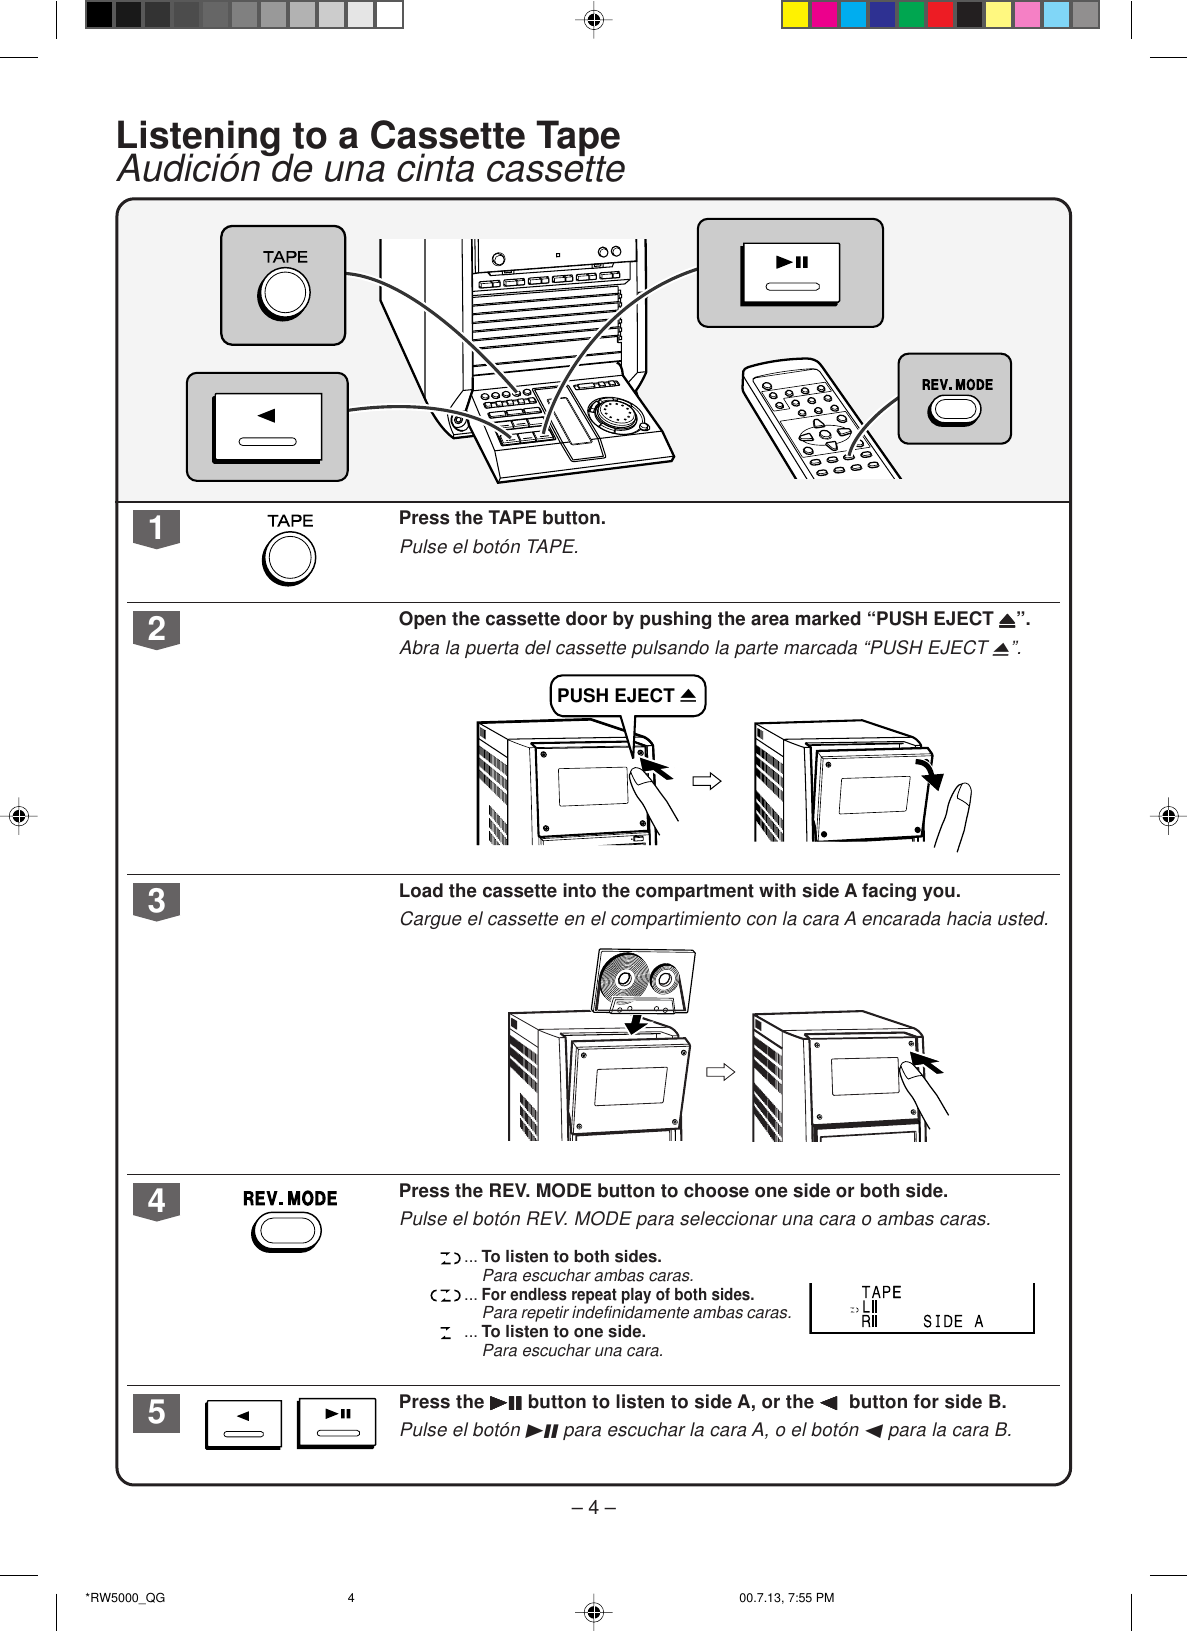 Page 4 of 8 - Sharp Cdrw5000-Quick-Guide CD-RW5000 Quick Start Guide